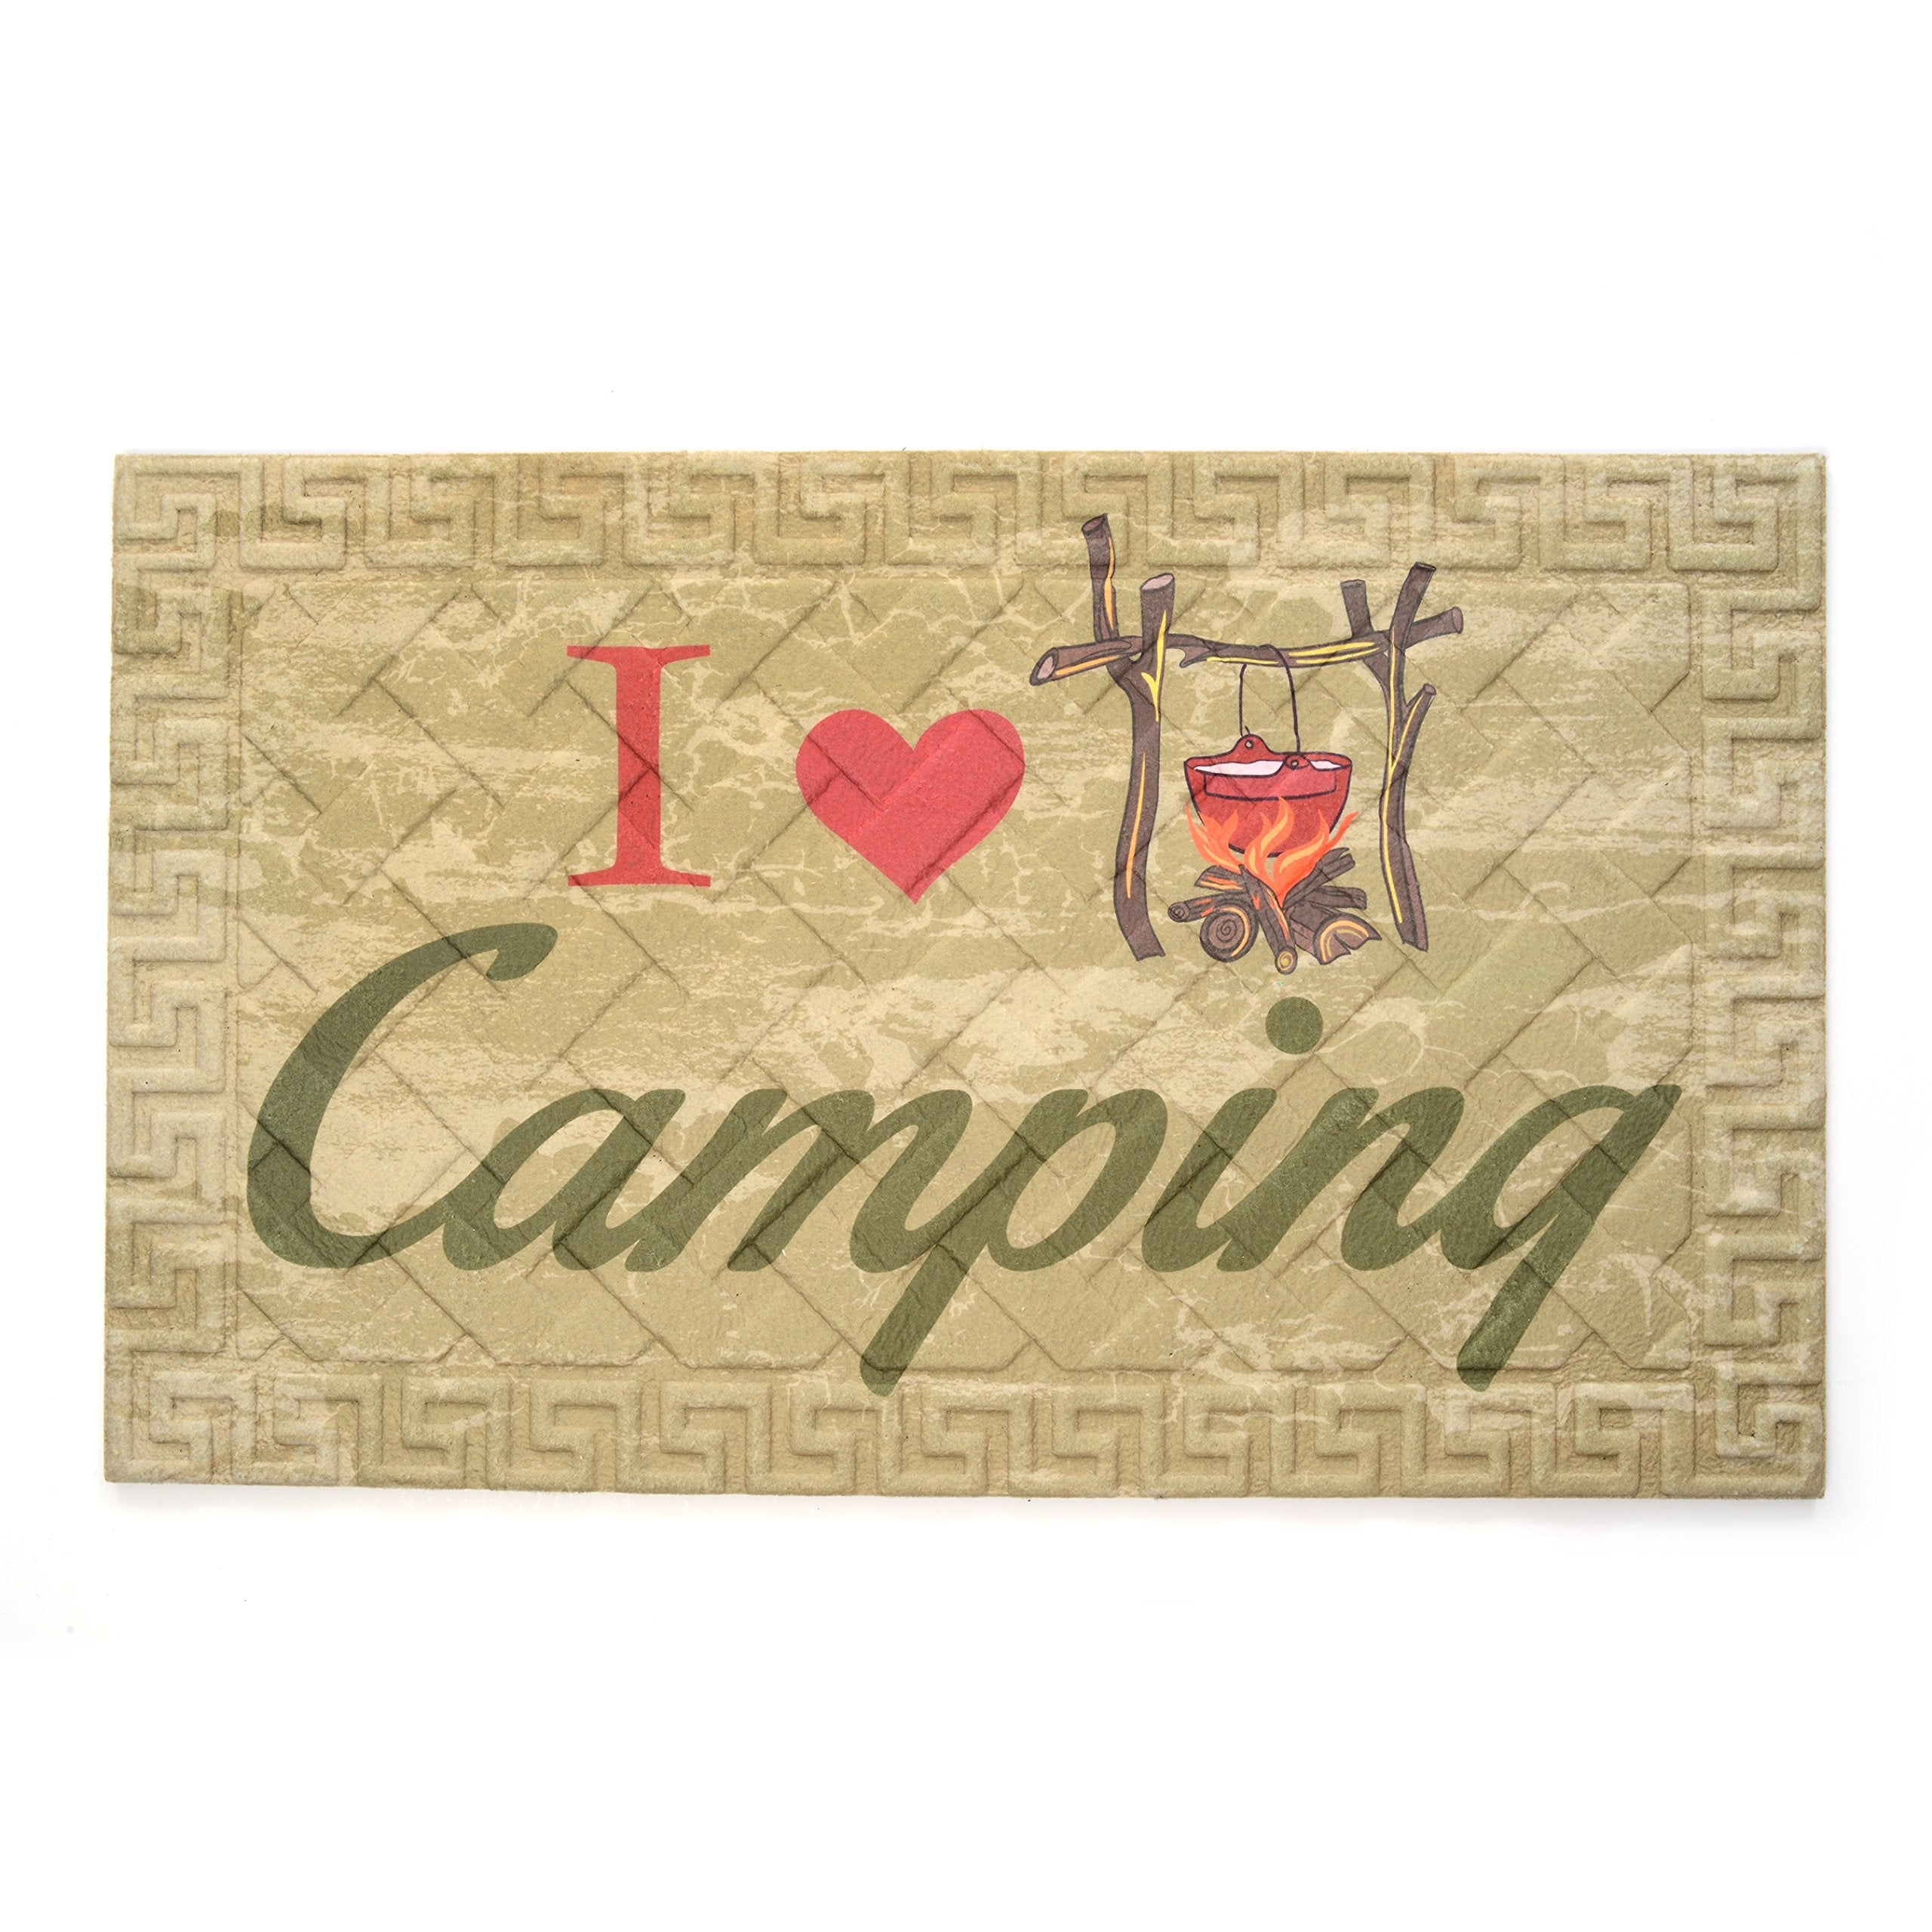 Stephan Roberts Recycled Rubber Door Mat 18" x 30", I Love Camping